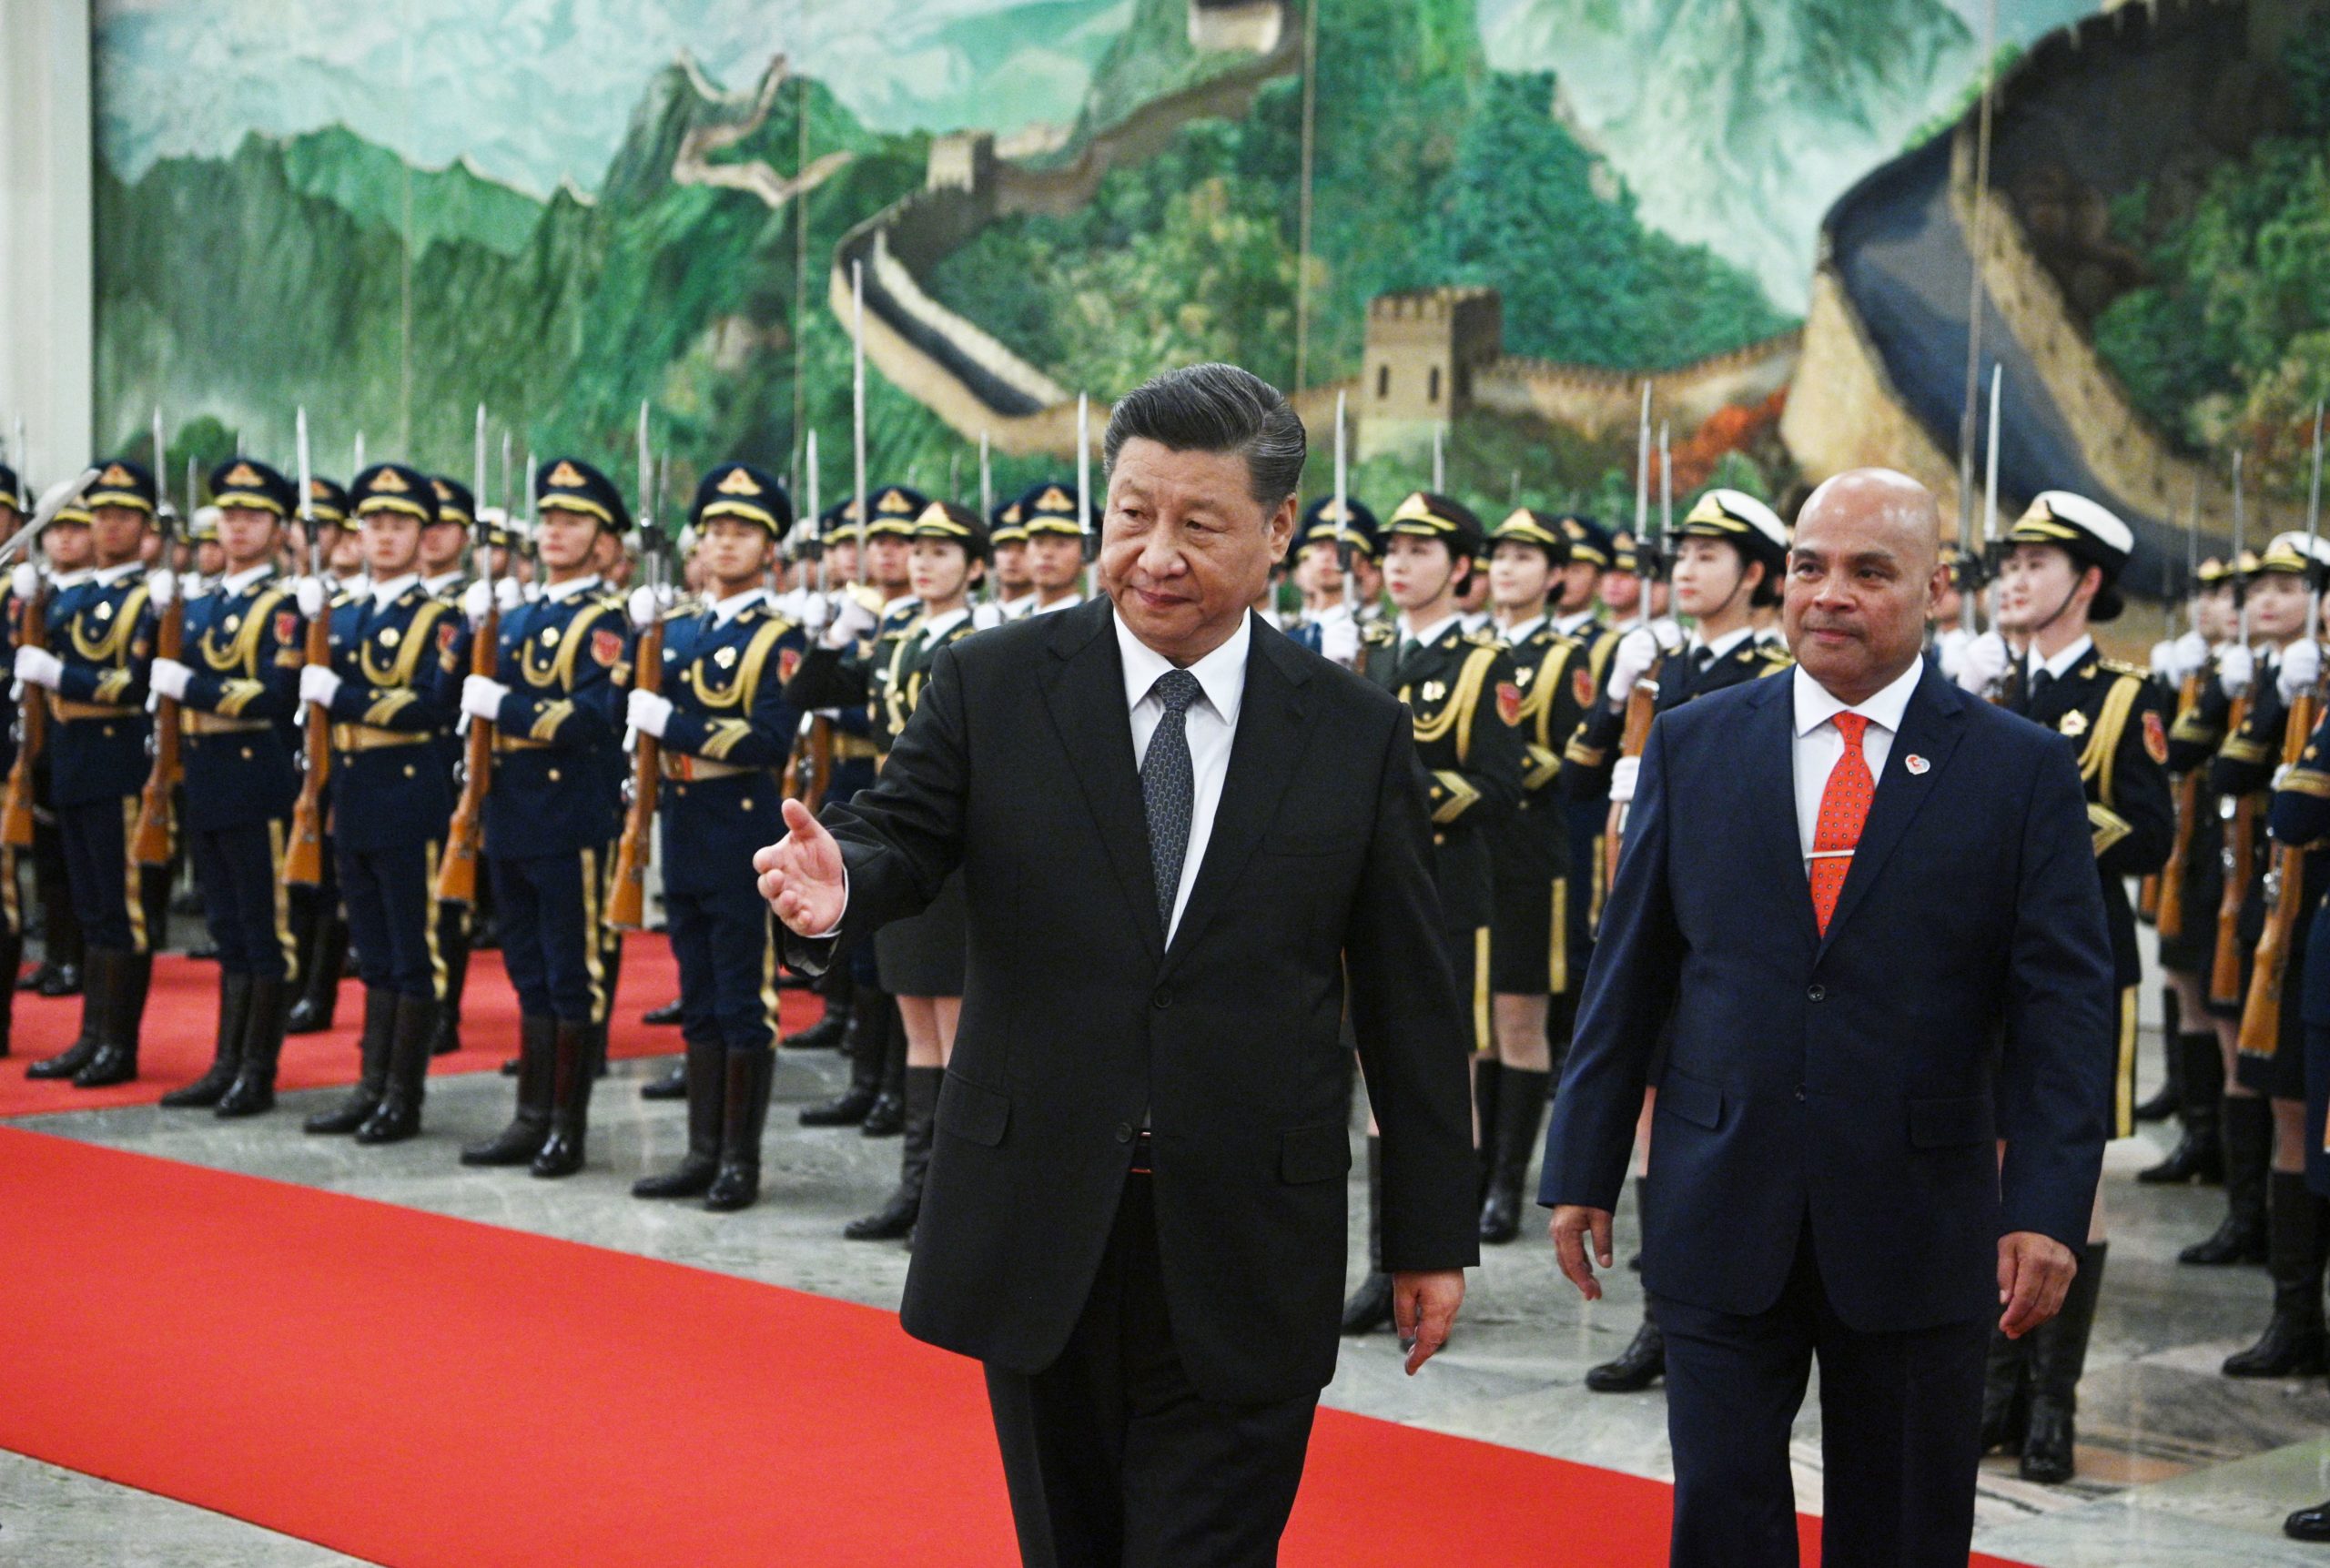 Chinas President Xi Jinping walks beside Micronesia's President David Panuelo (R) during a welcoming ceremony at the Great Hall of the People in Beijing on December 13, 2019. (Photo by Noel Celis / AFP)